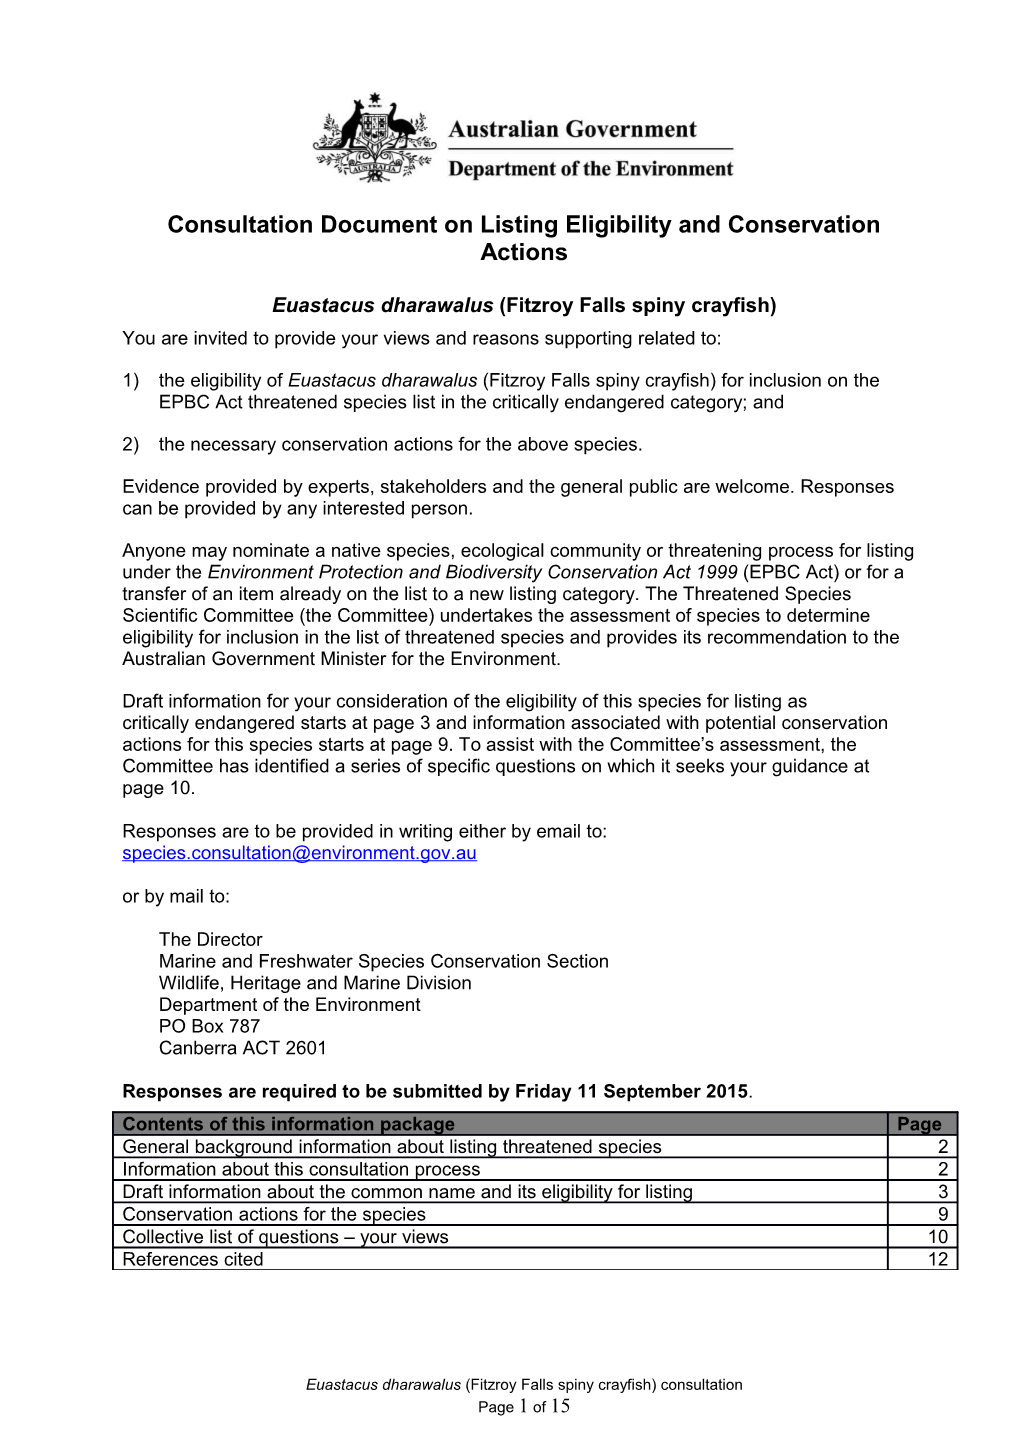 Consultation Document on Listing Eligibility and Conservation Actions - Euastacus Dharawalus